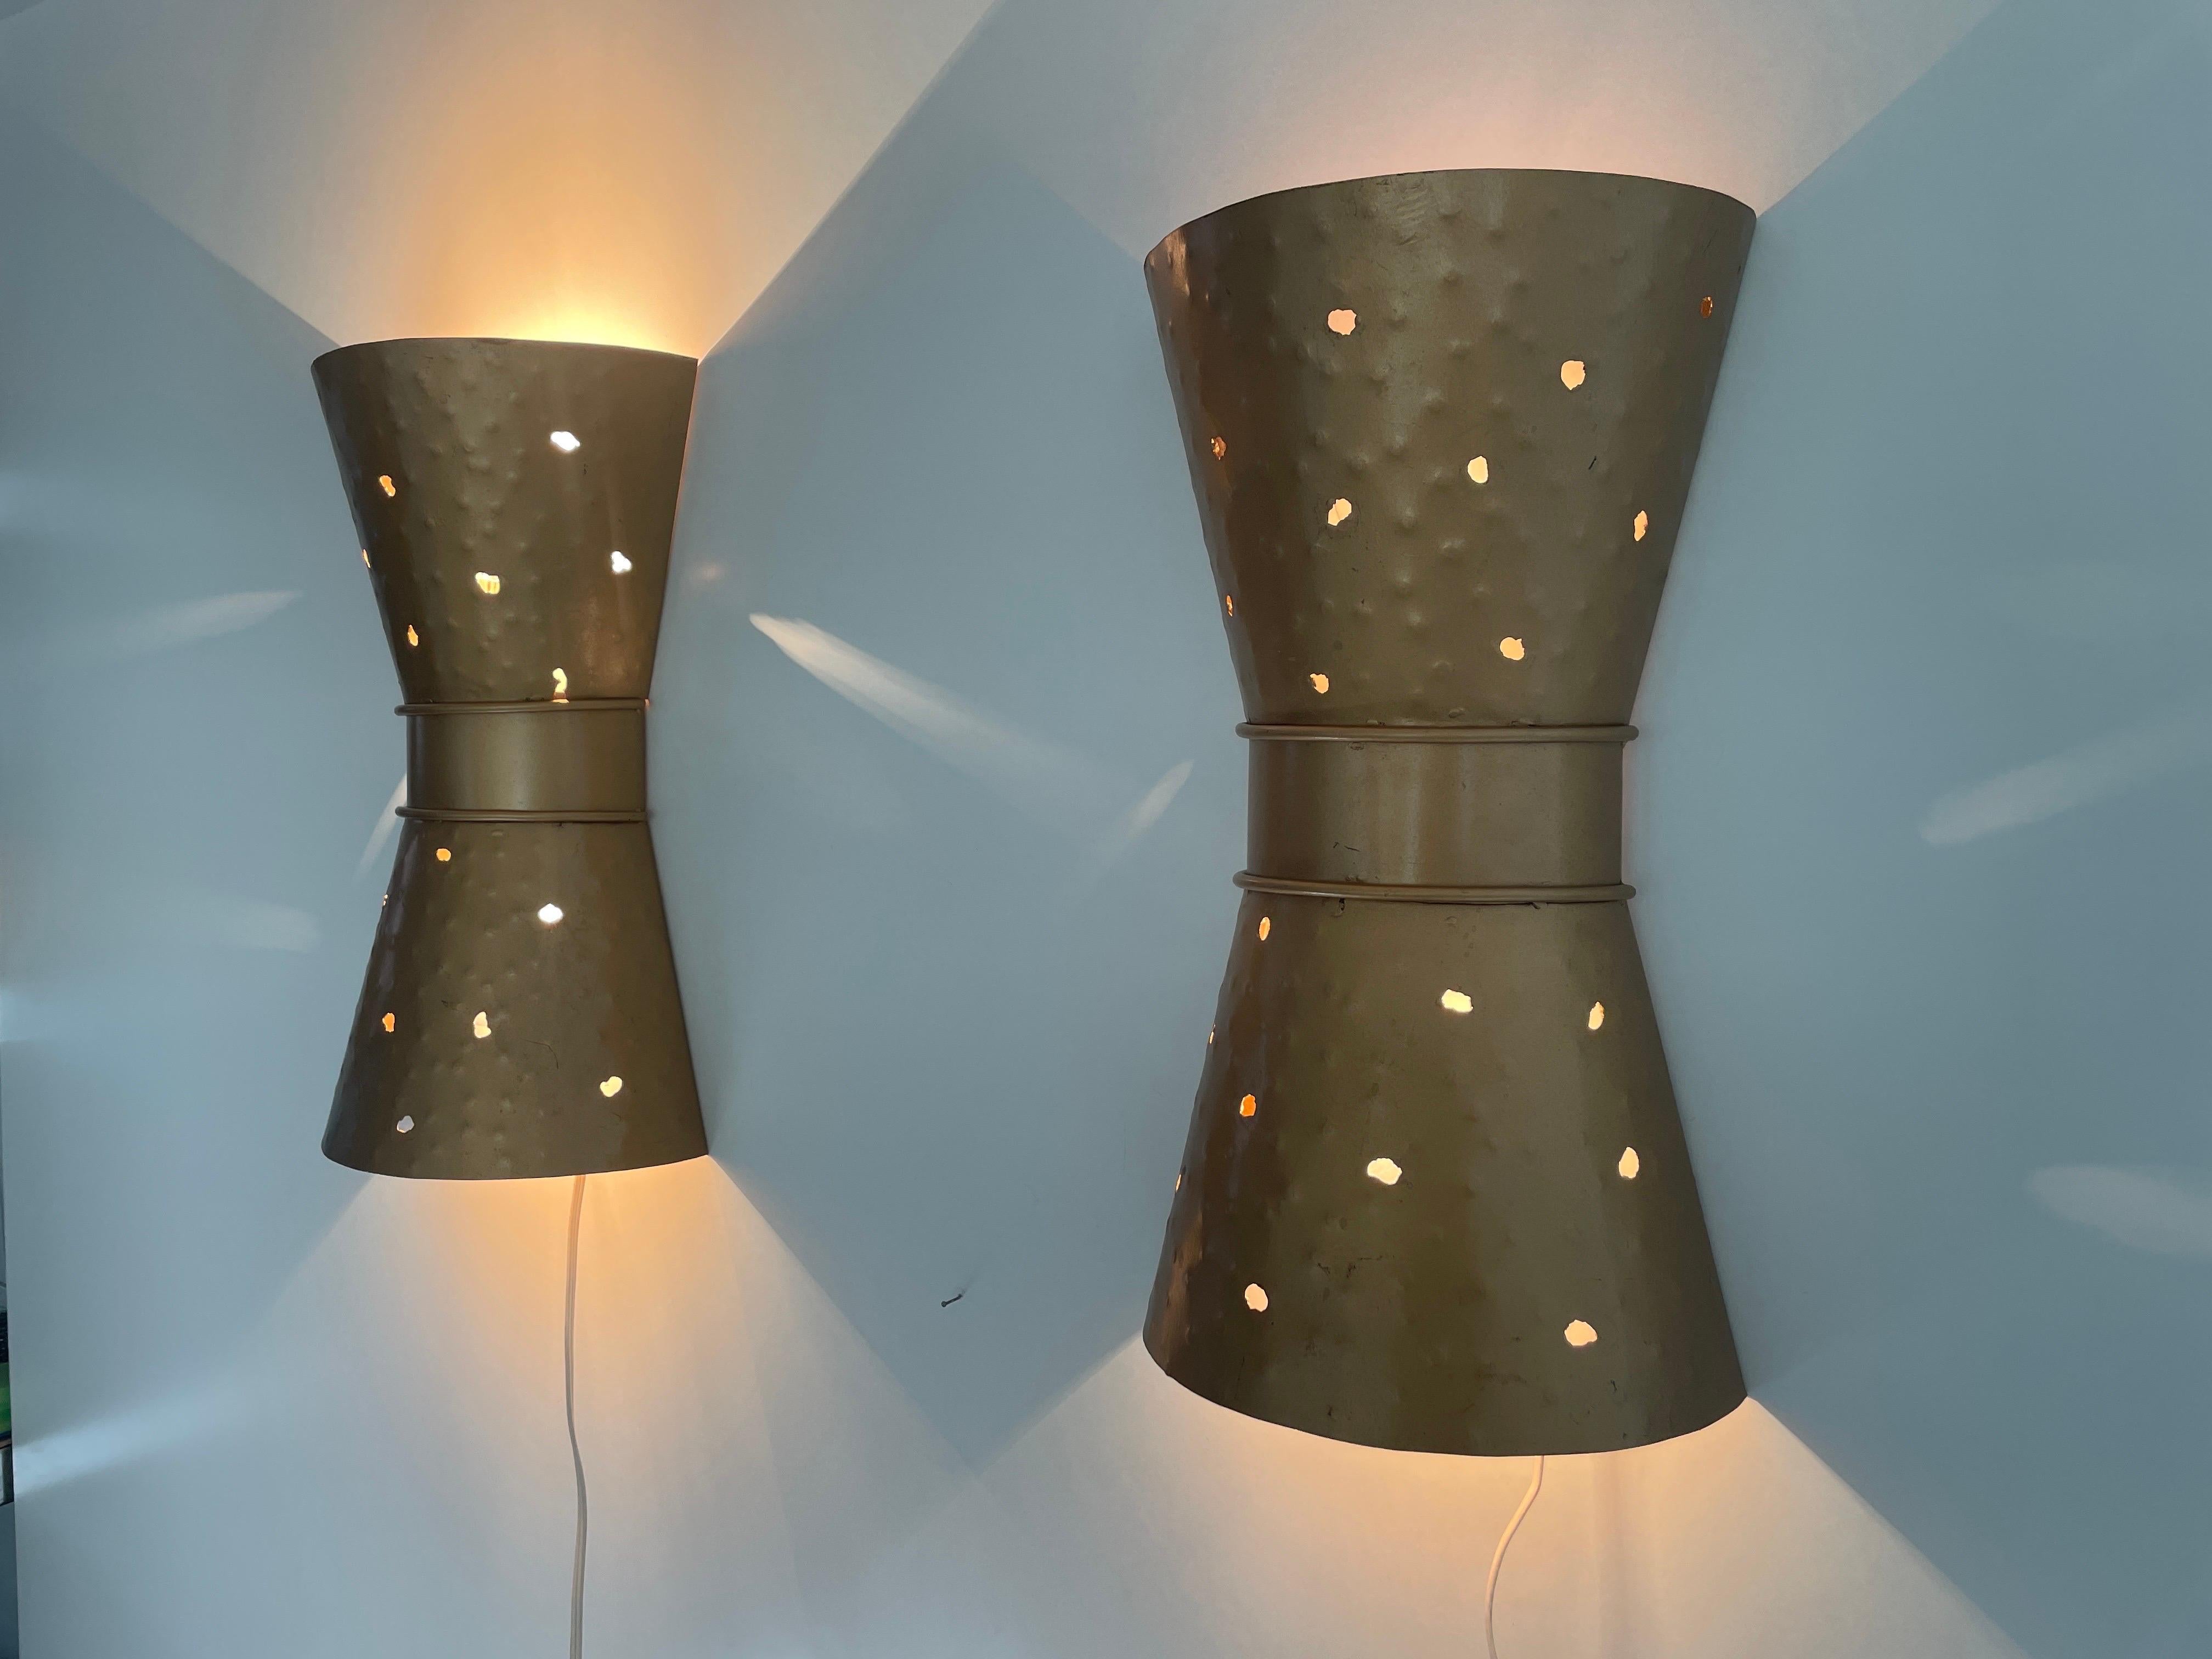 Diabolo Style Design Hand-crafted Pair of Sconces, 1970s, Germany For Sale 6